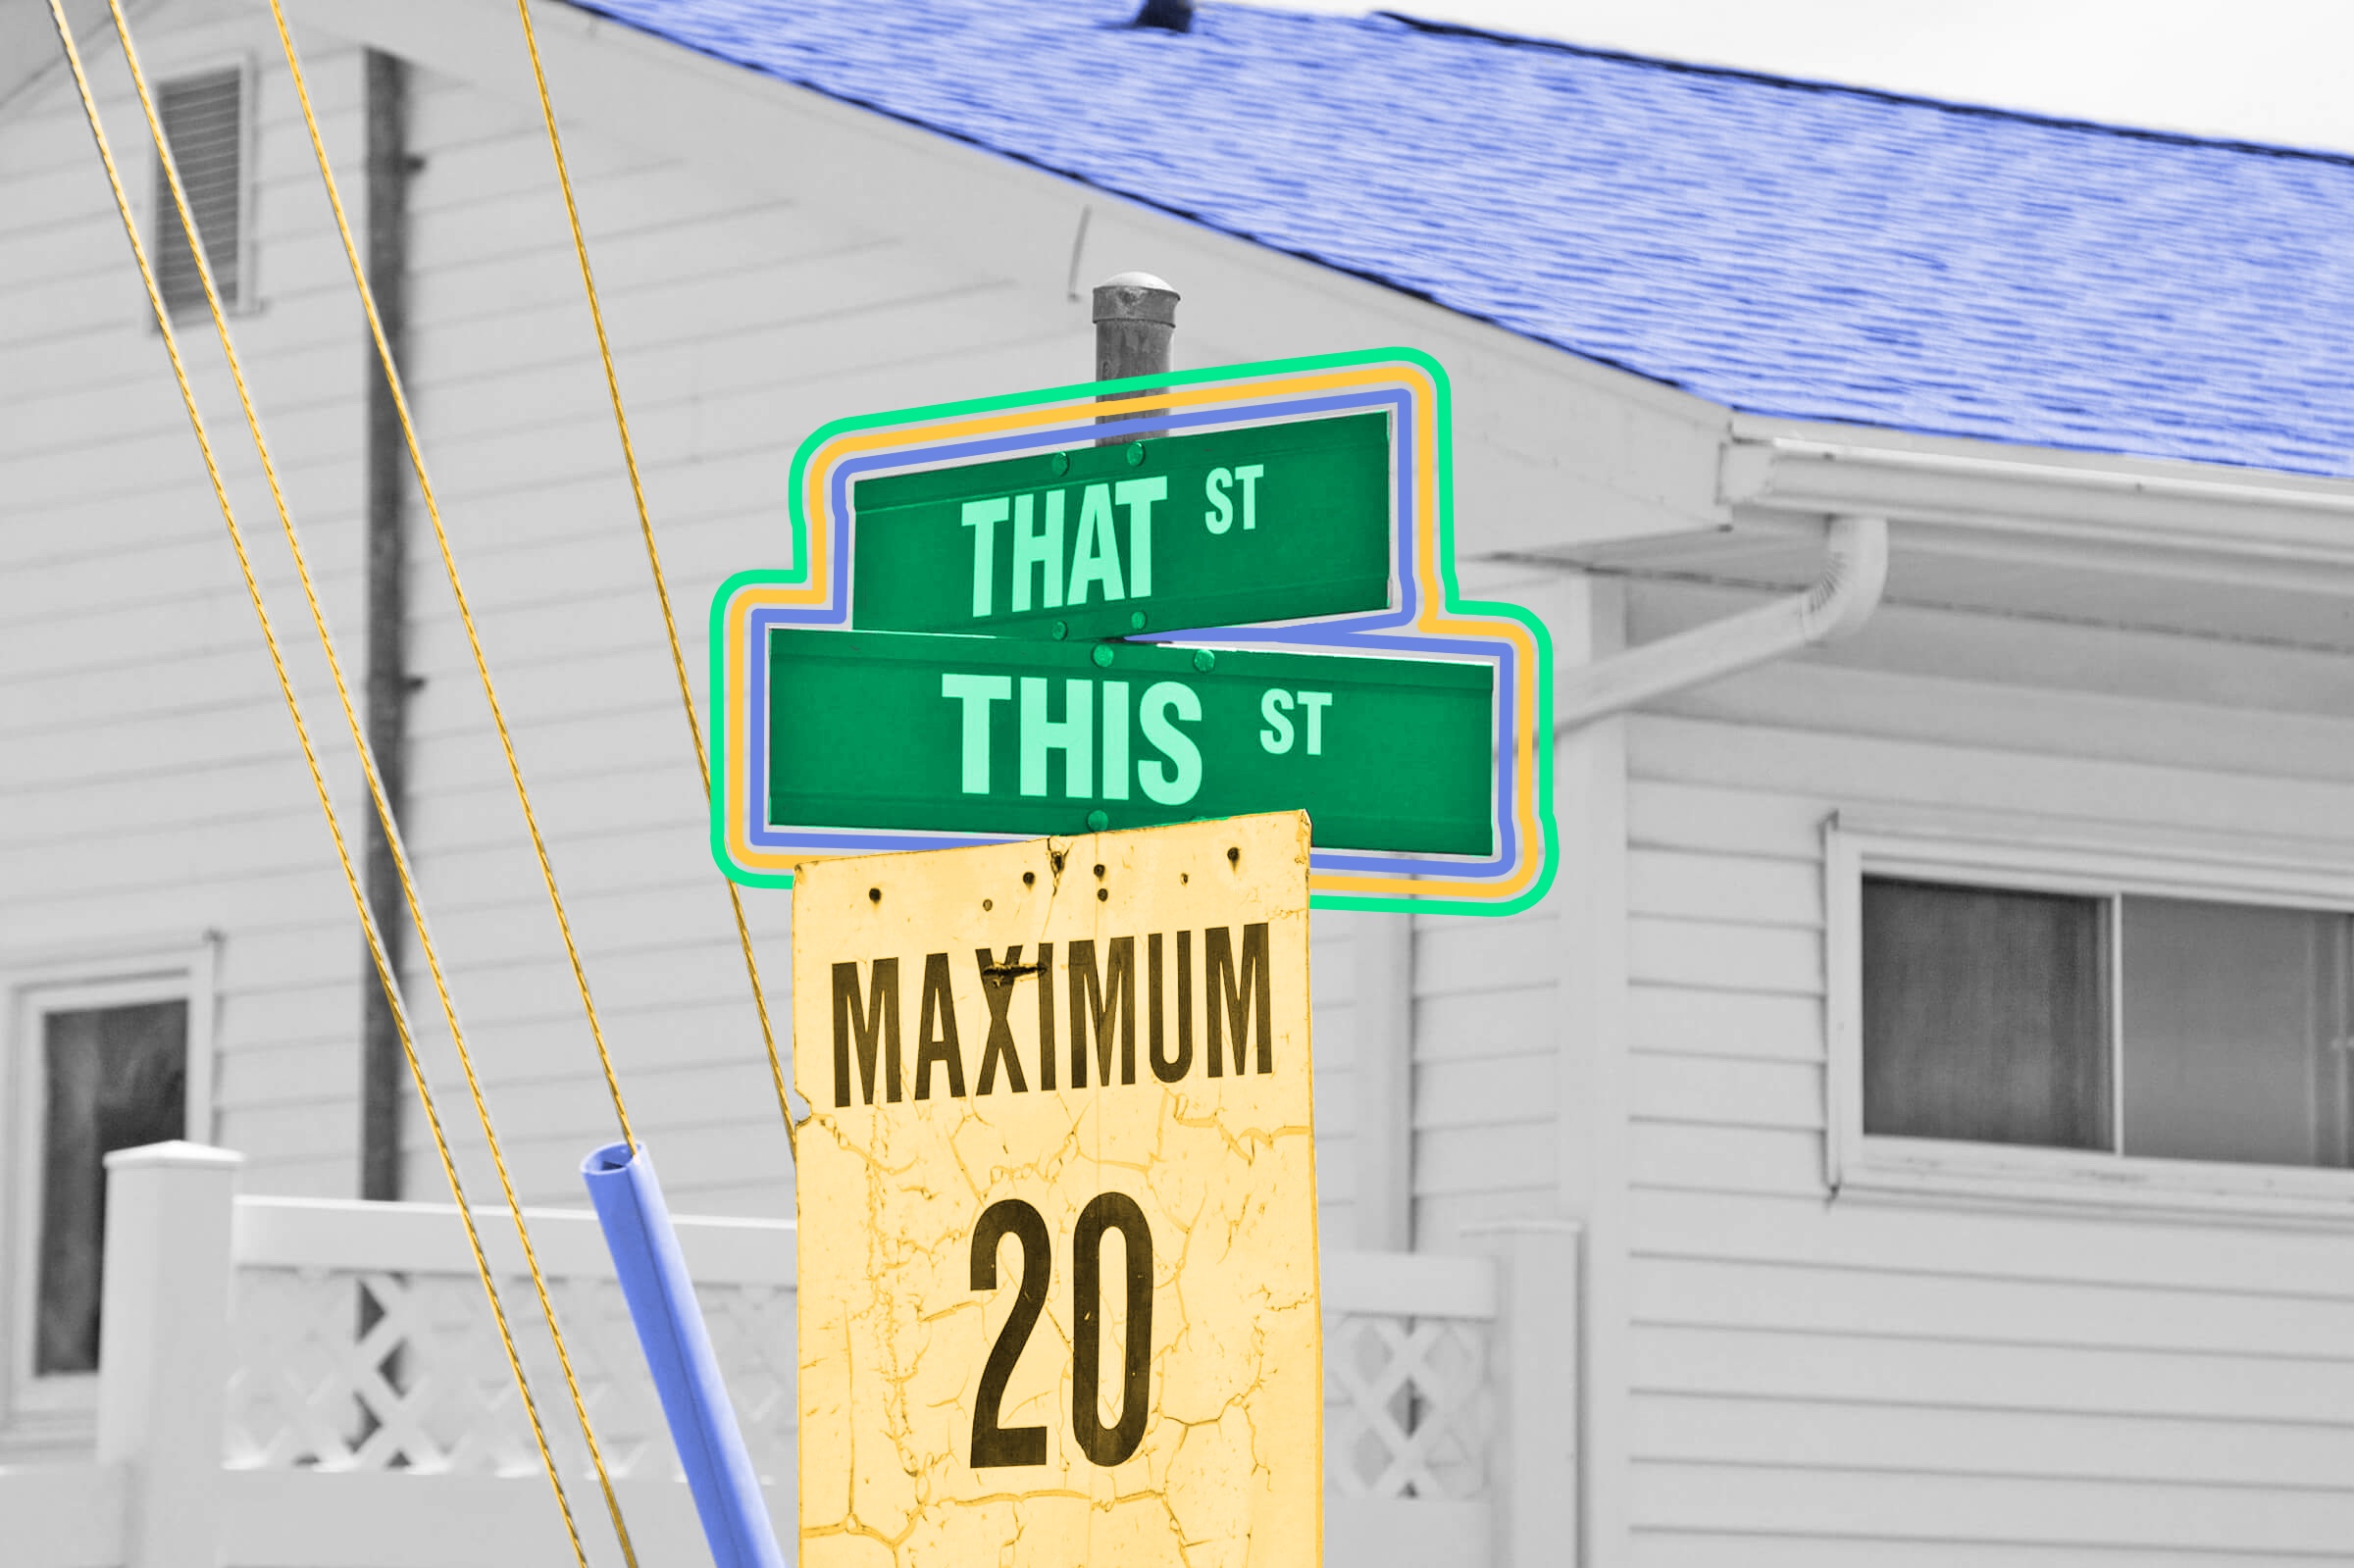 In Nova Scotia, Canada, you can stand on the corner of "This Street" and "That Street."